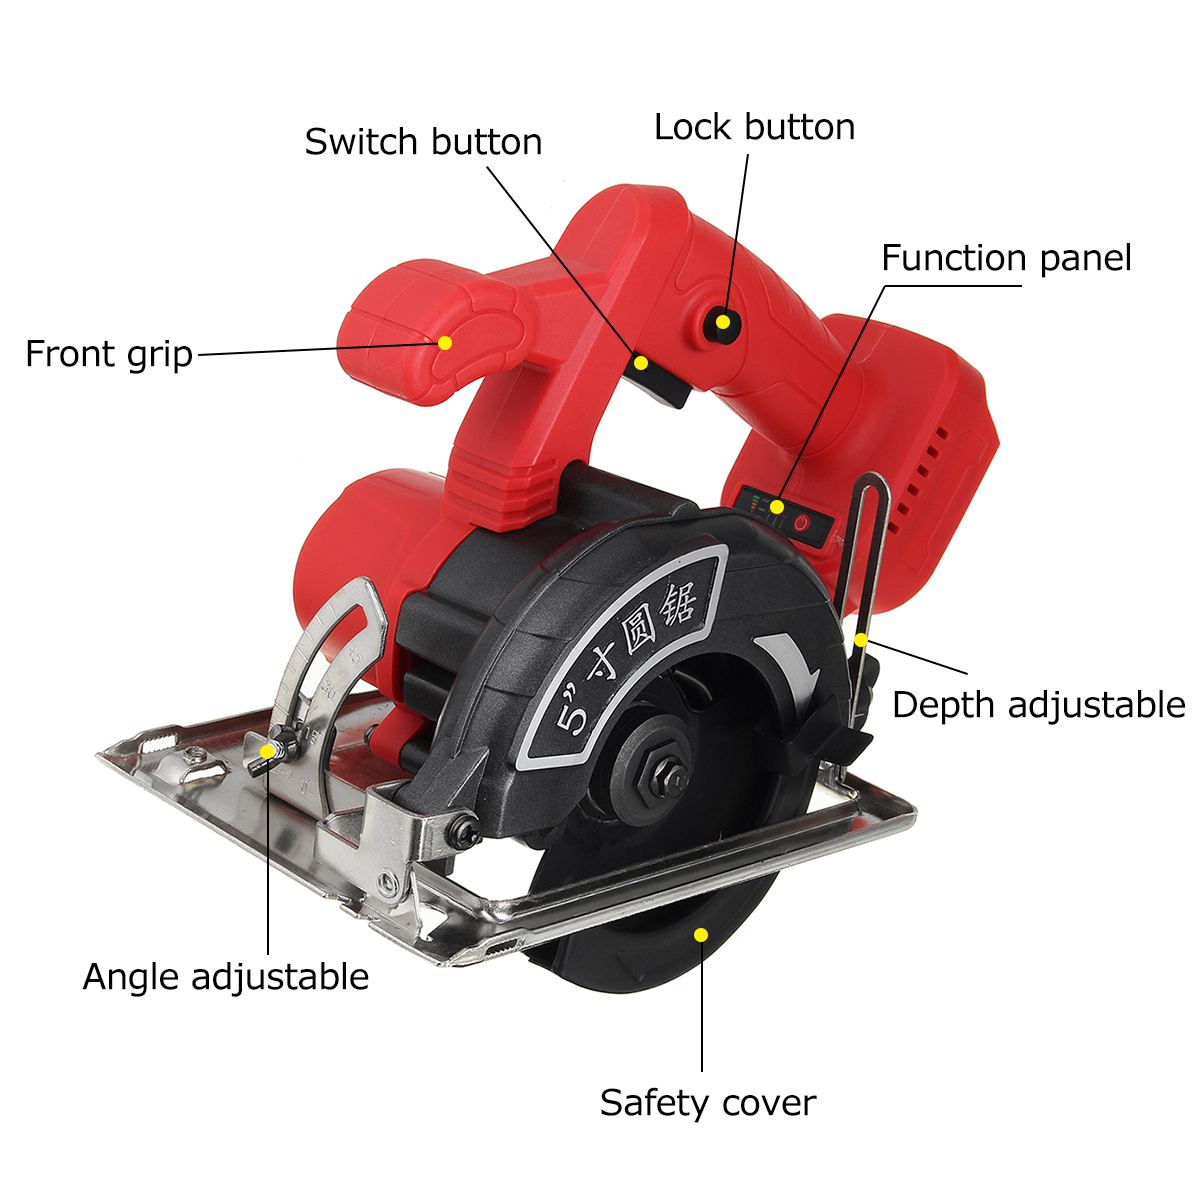 125mm-10800RPM-Multifunction-Circular-Saw-Scale-Bevel-Cutting-Power-Tools-For-18V-Makita-Battery-1759378-6